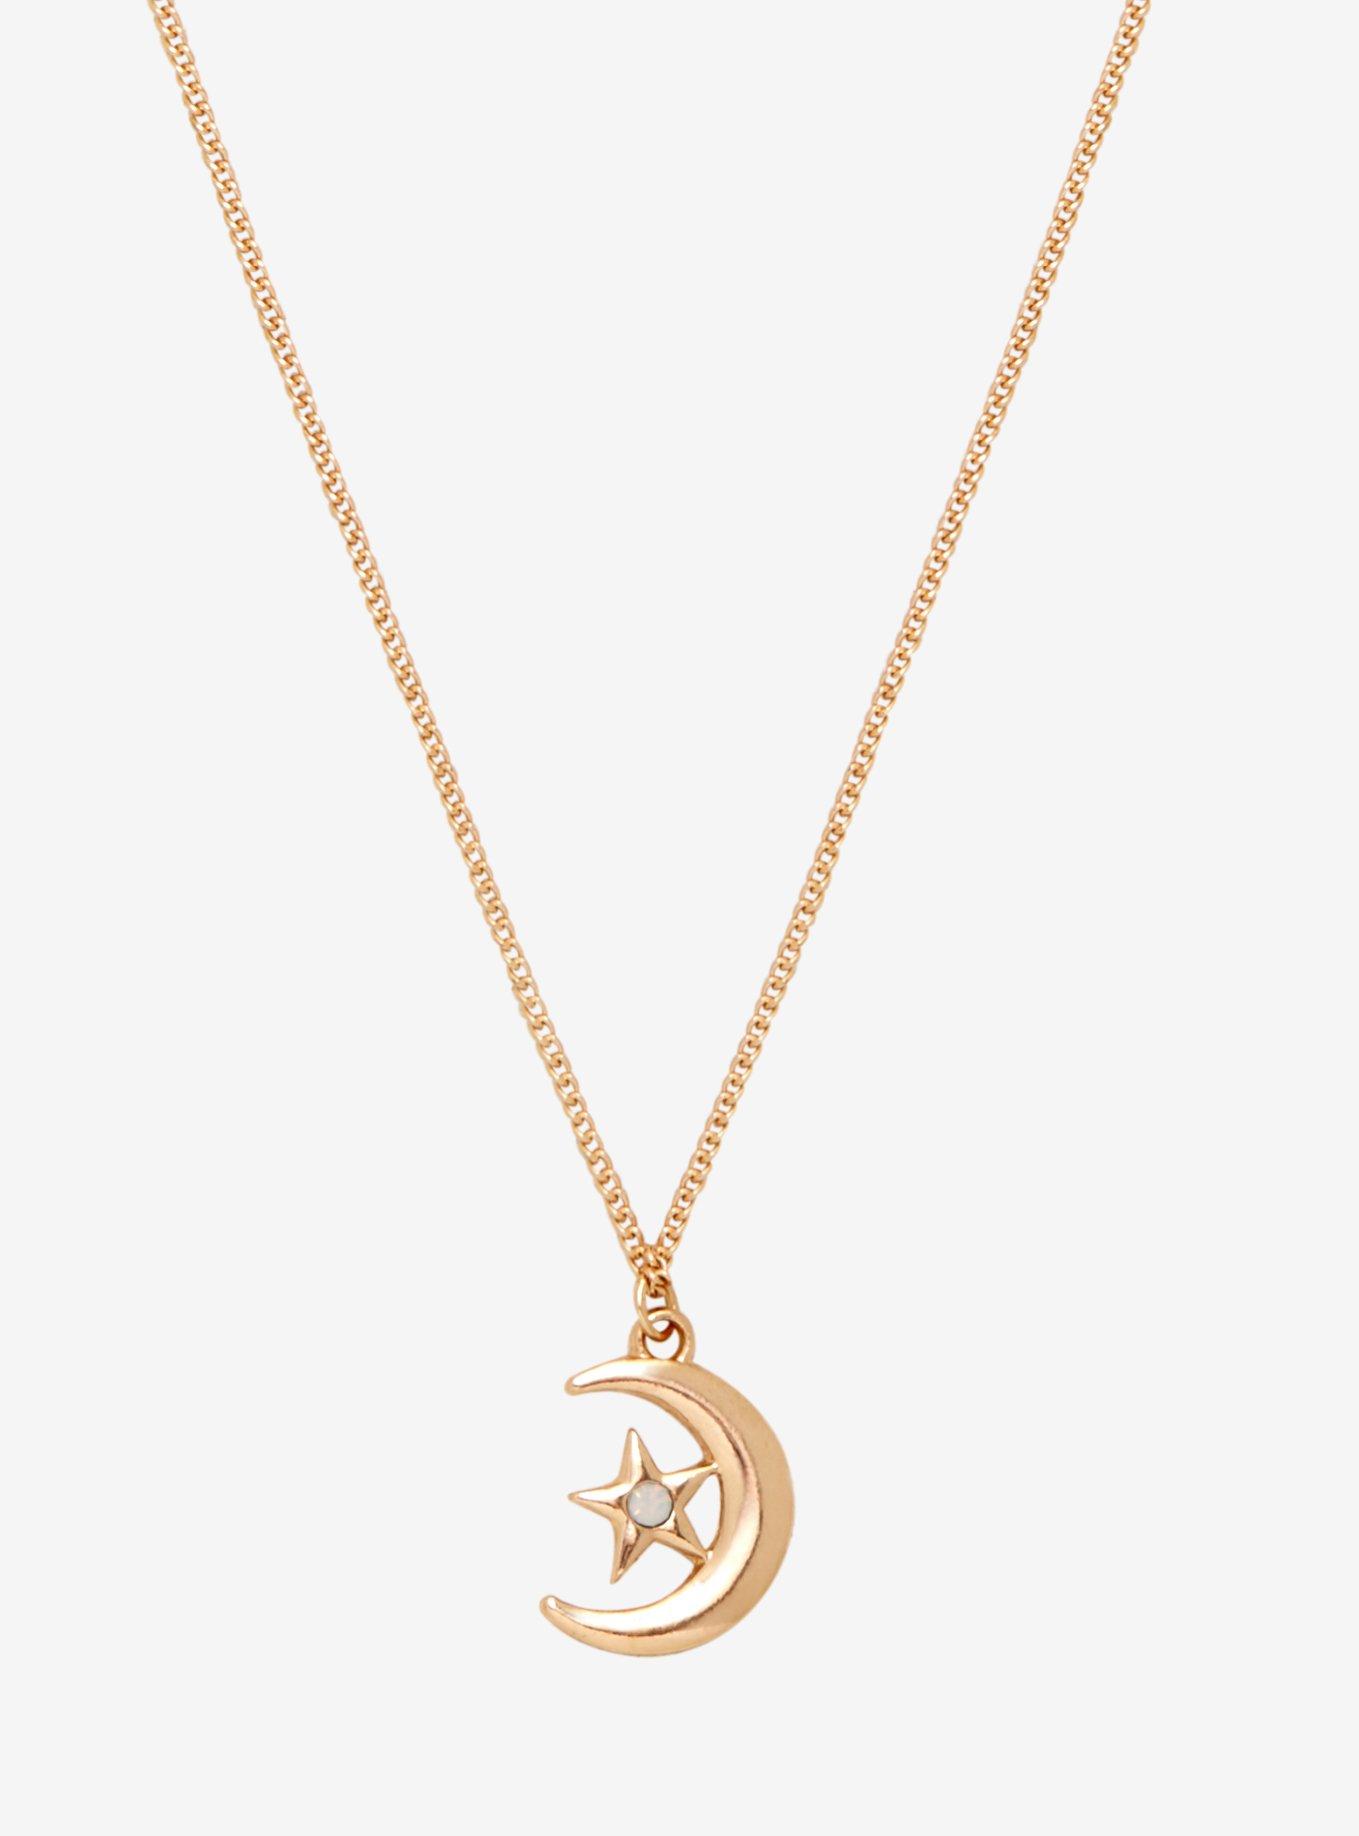 Light Up My Life Crescent Moon Star Necklace | Hot Topic